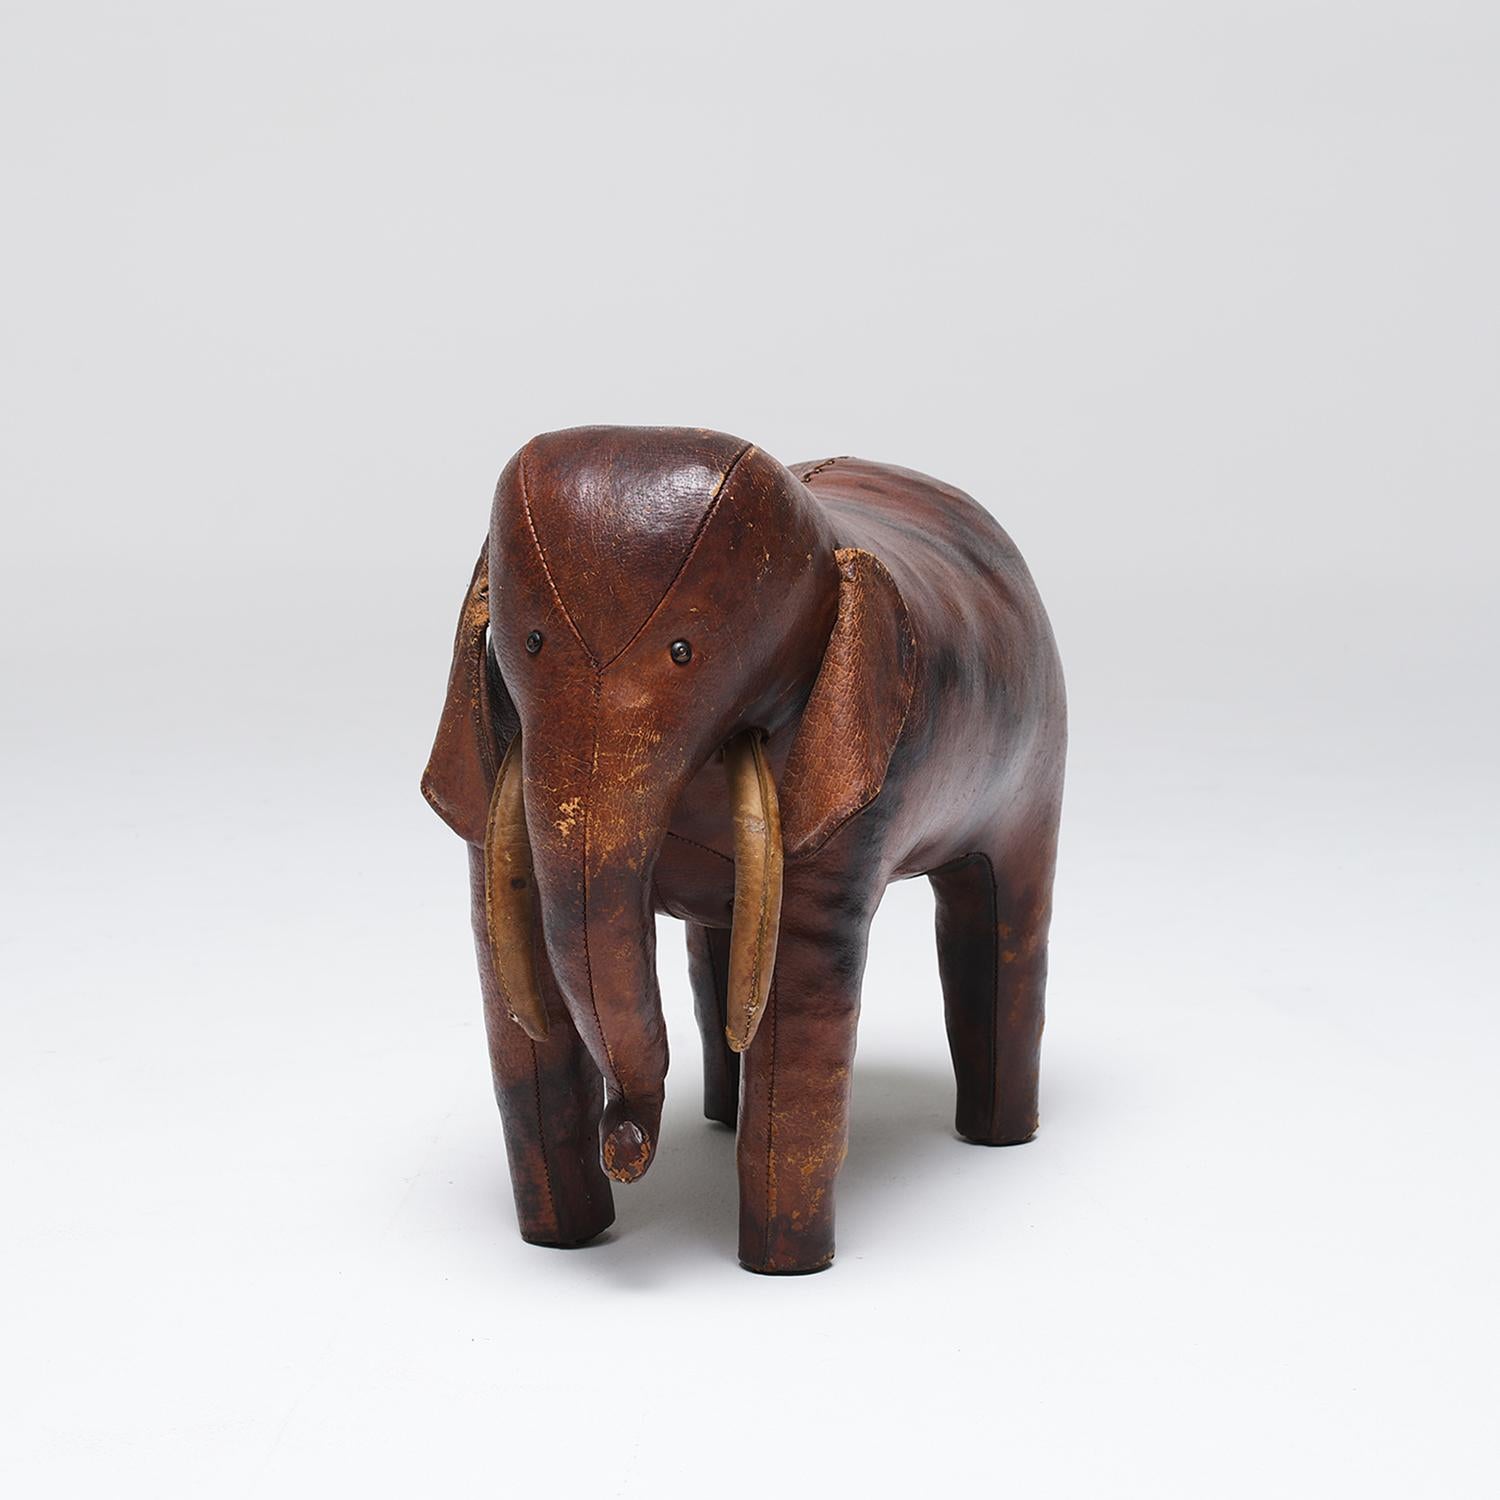 Mid-Century Modern 20th Century English Vintage Elephant Footstool by Dimitri Omersa For Sale